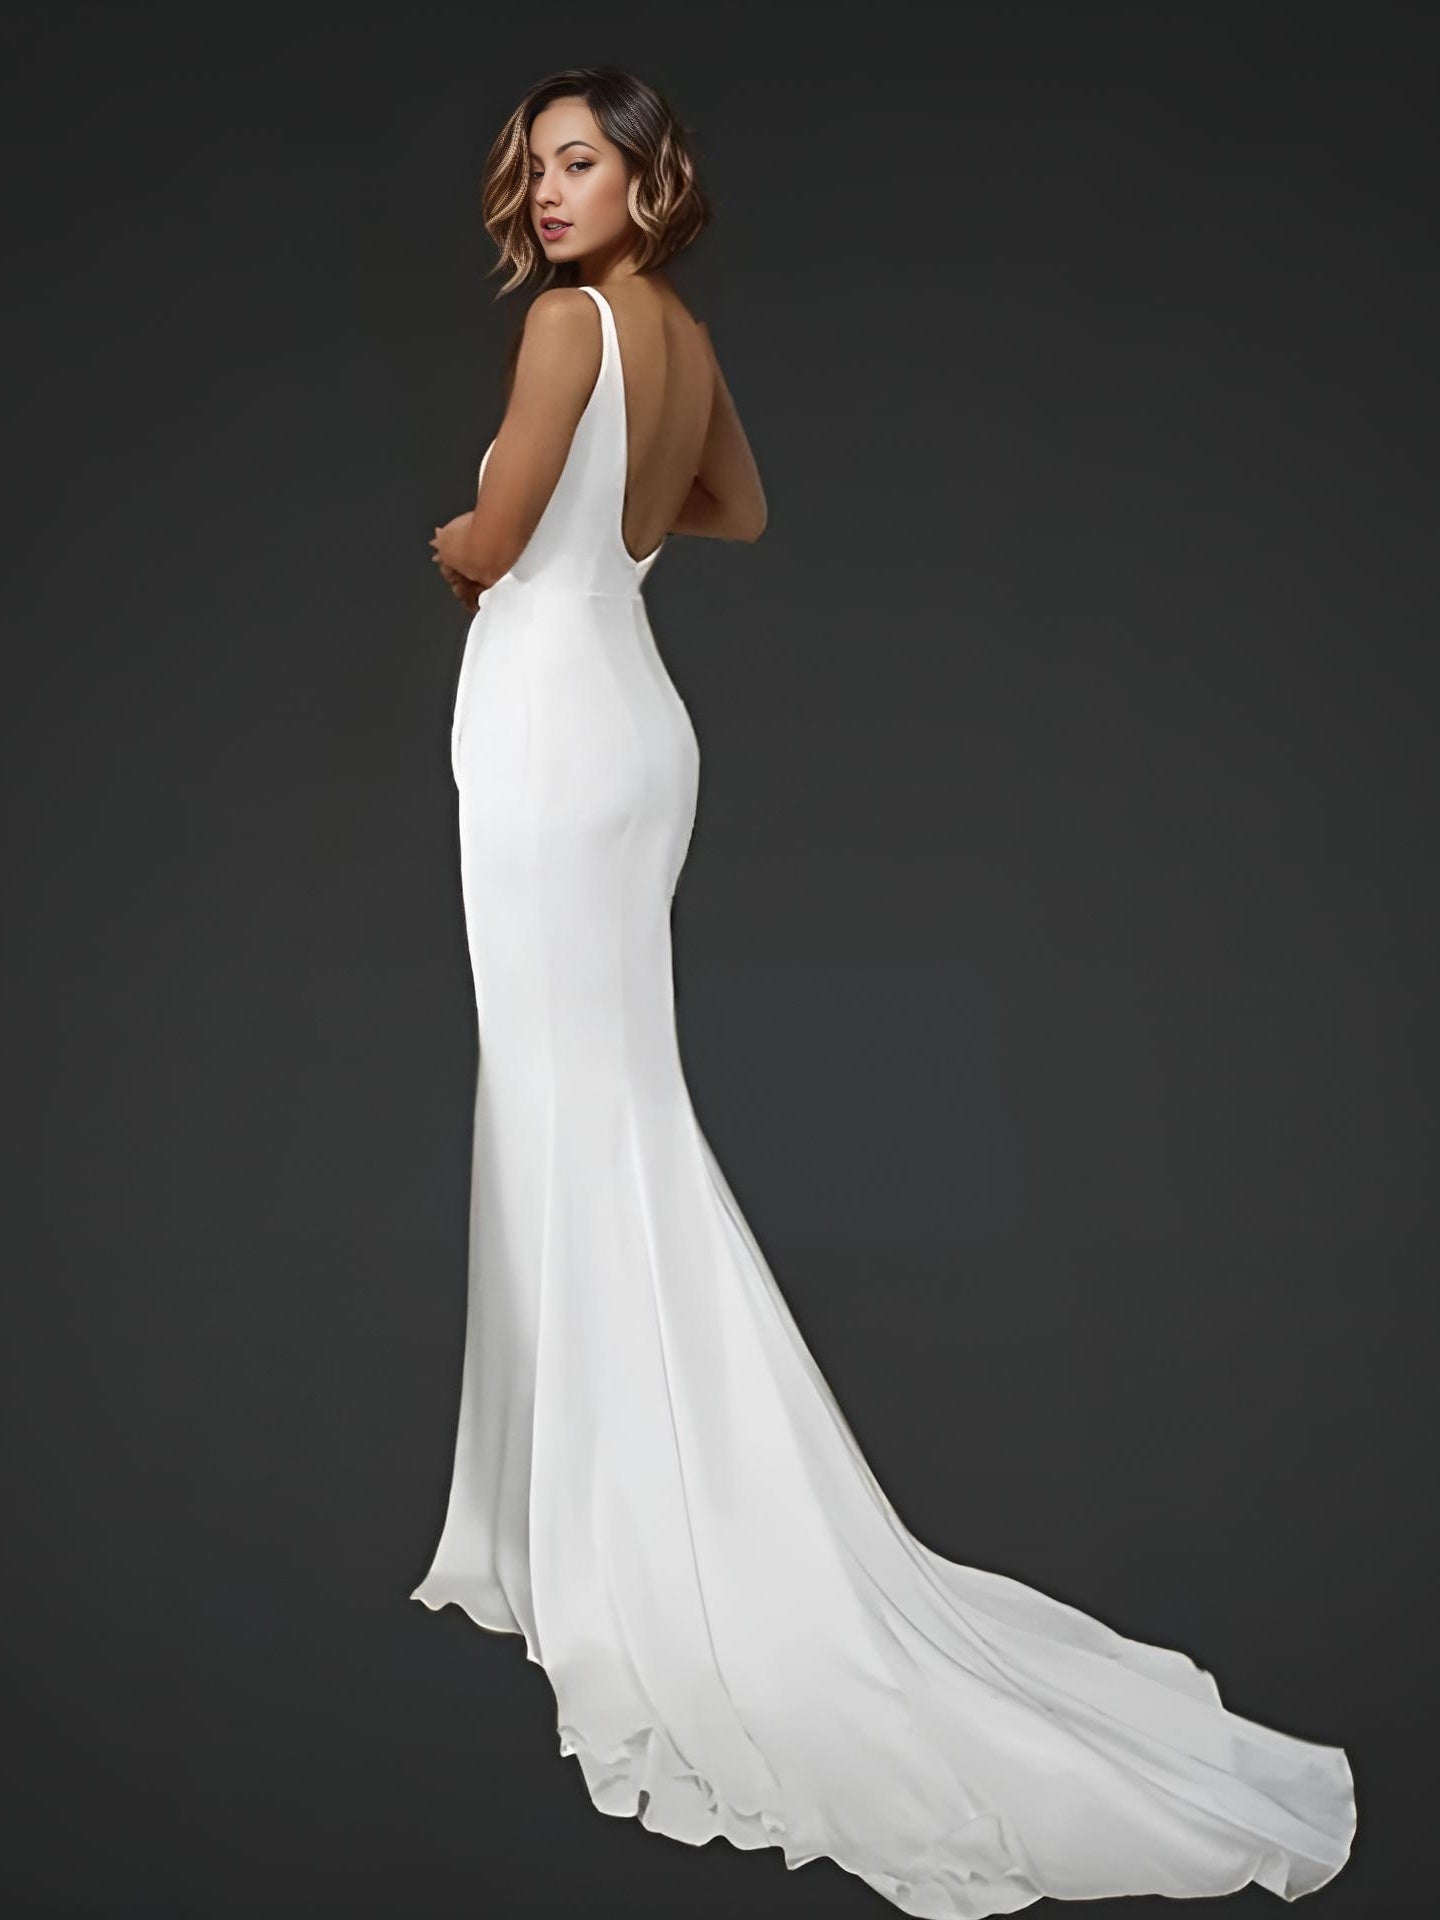 Woman in bridal gown featuring a backless design and train